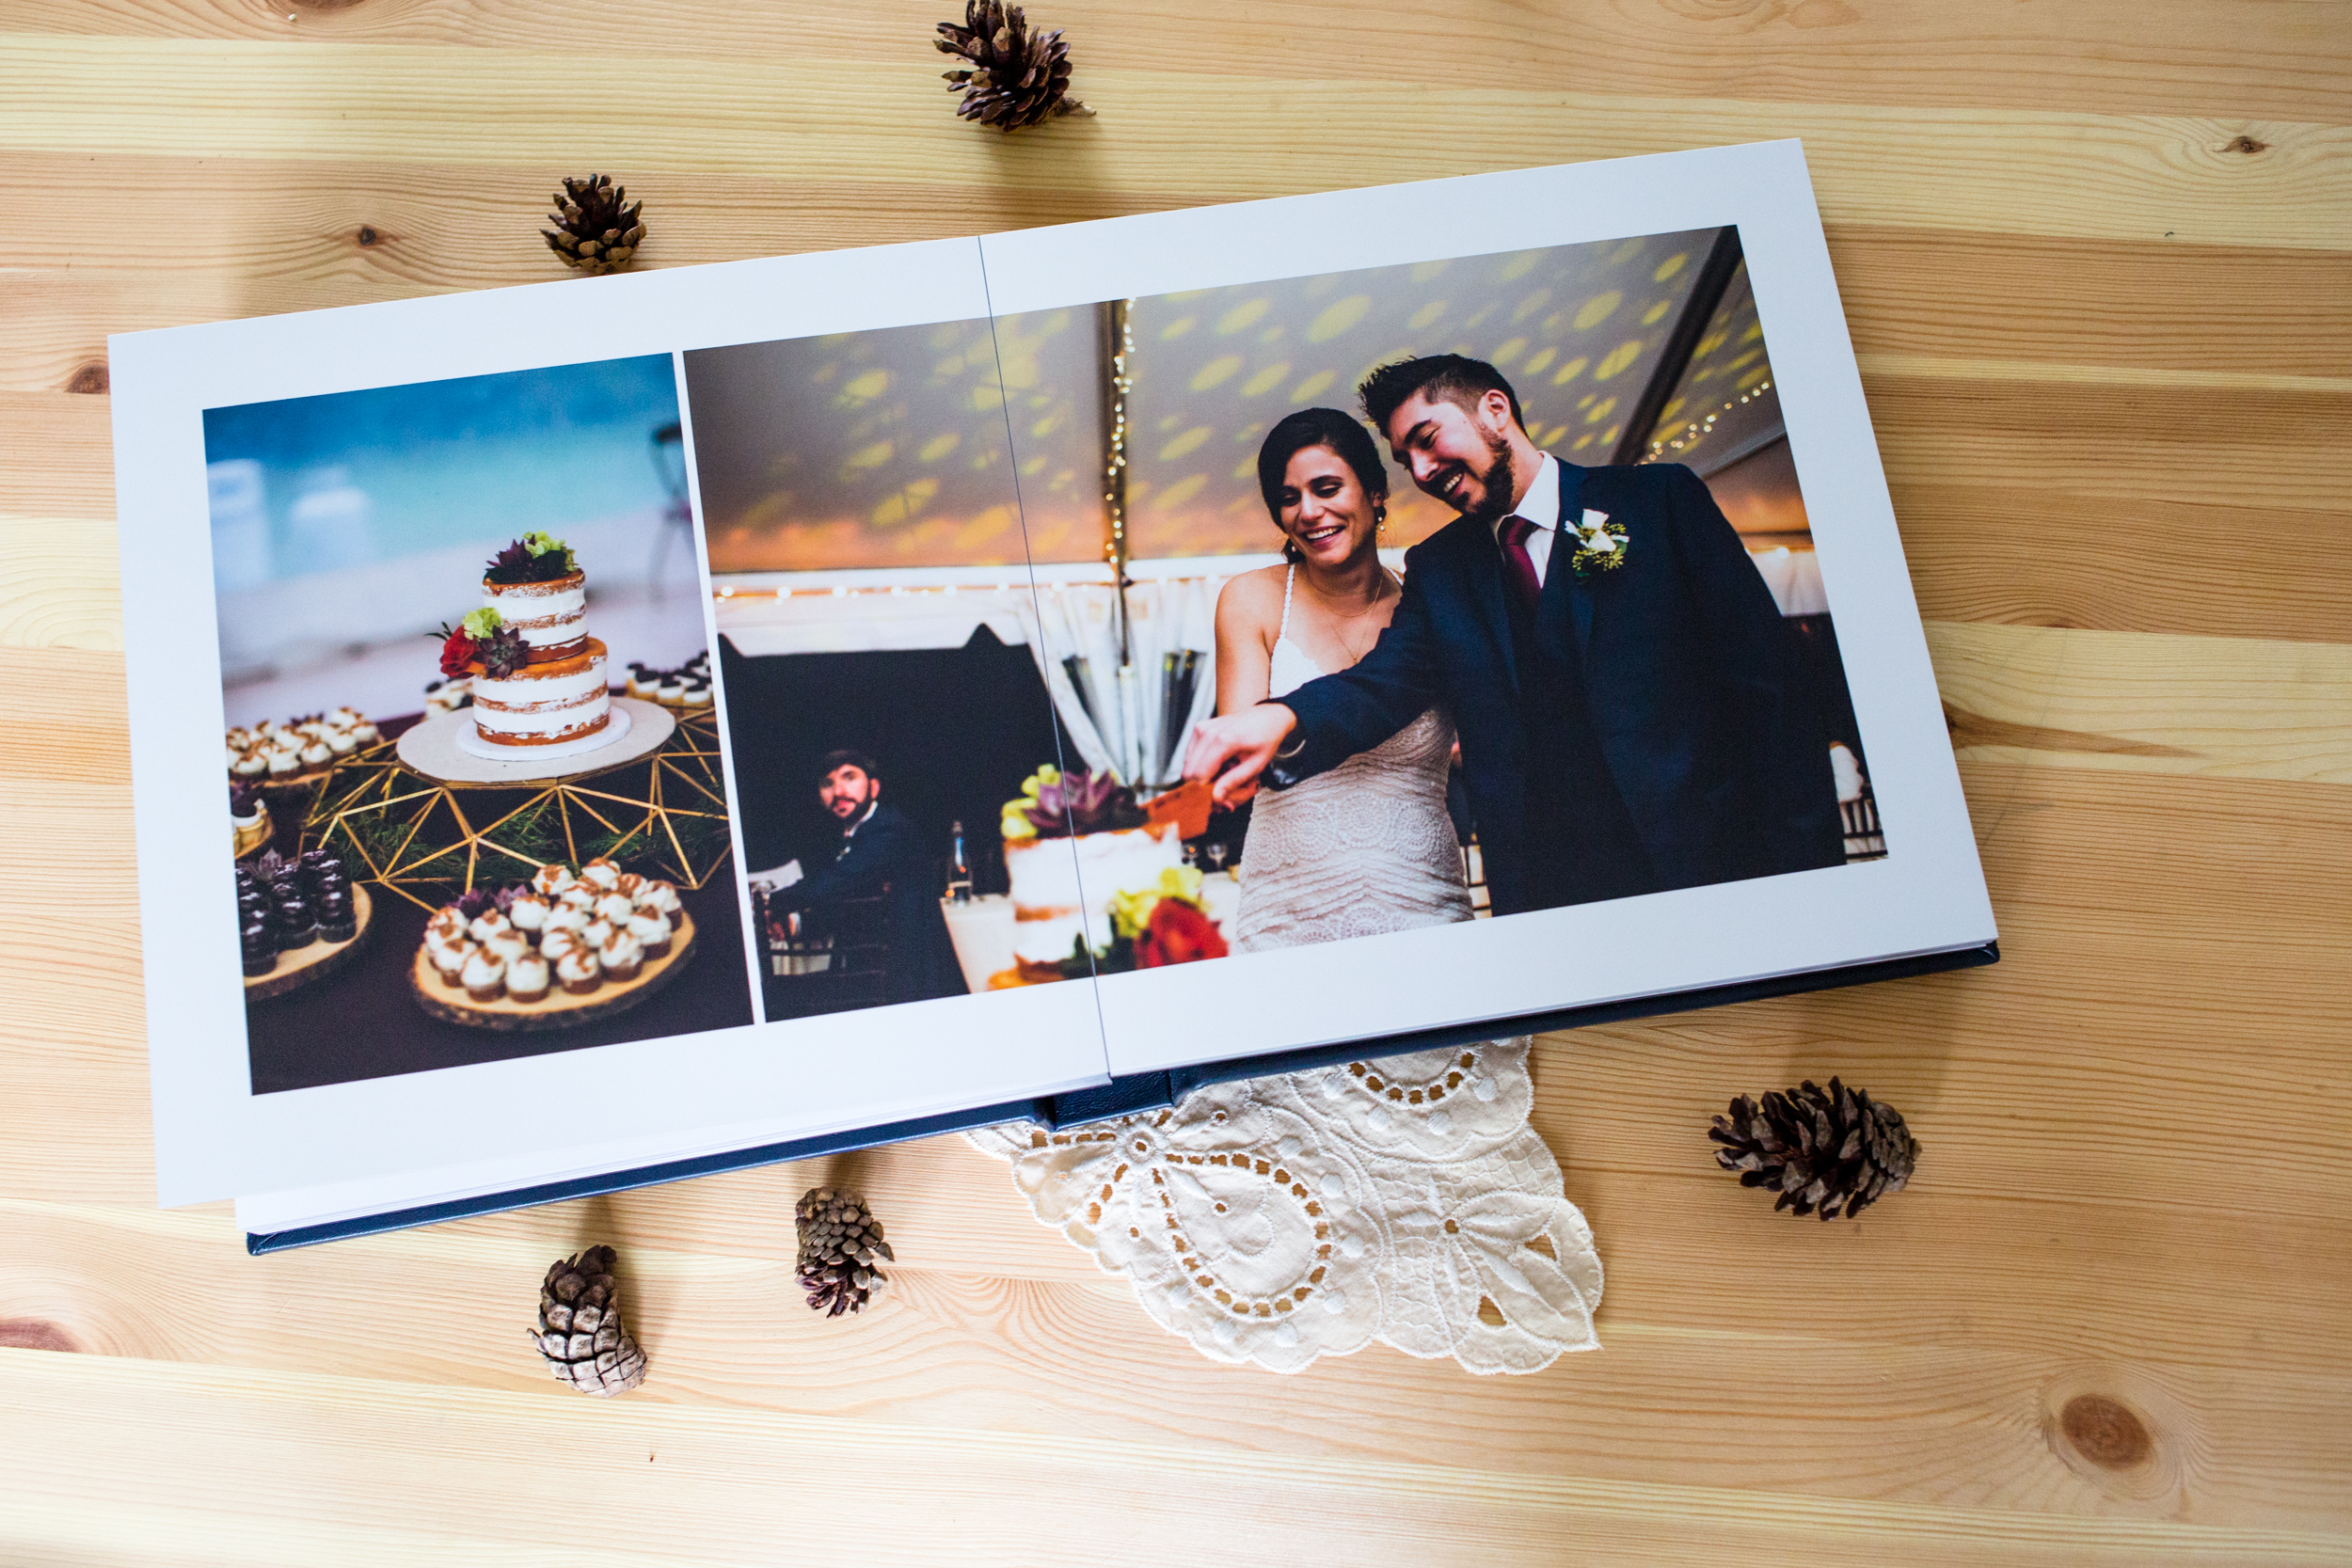 Heirloom albums make a great addition to your wedding day. Photo by Joline Cameron Photography